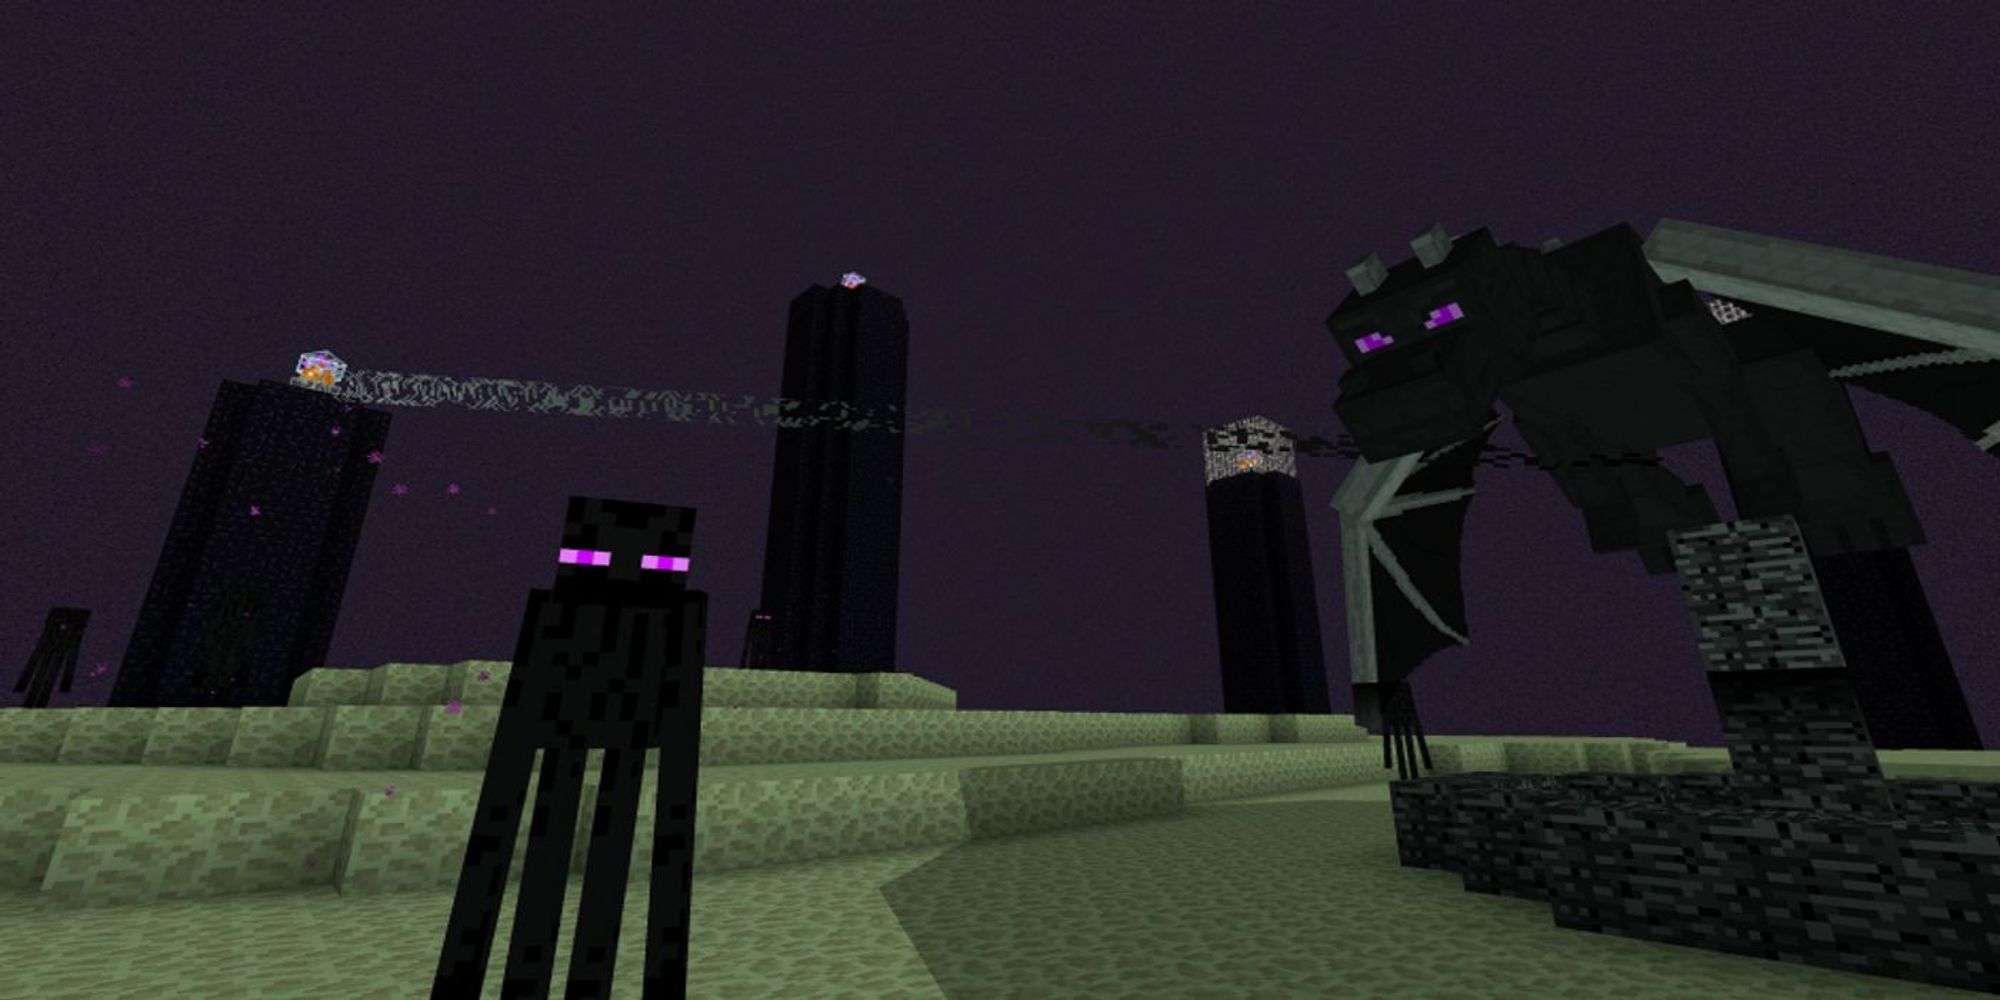 enderman and ender dragon standing next to each other